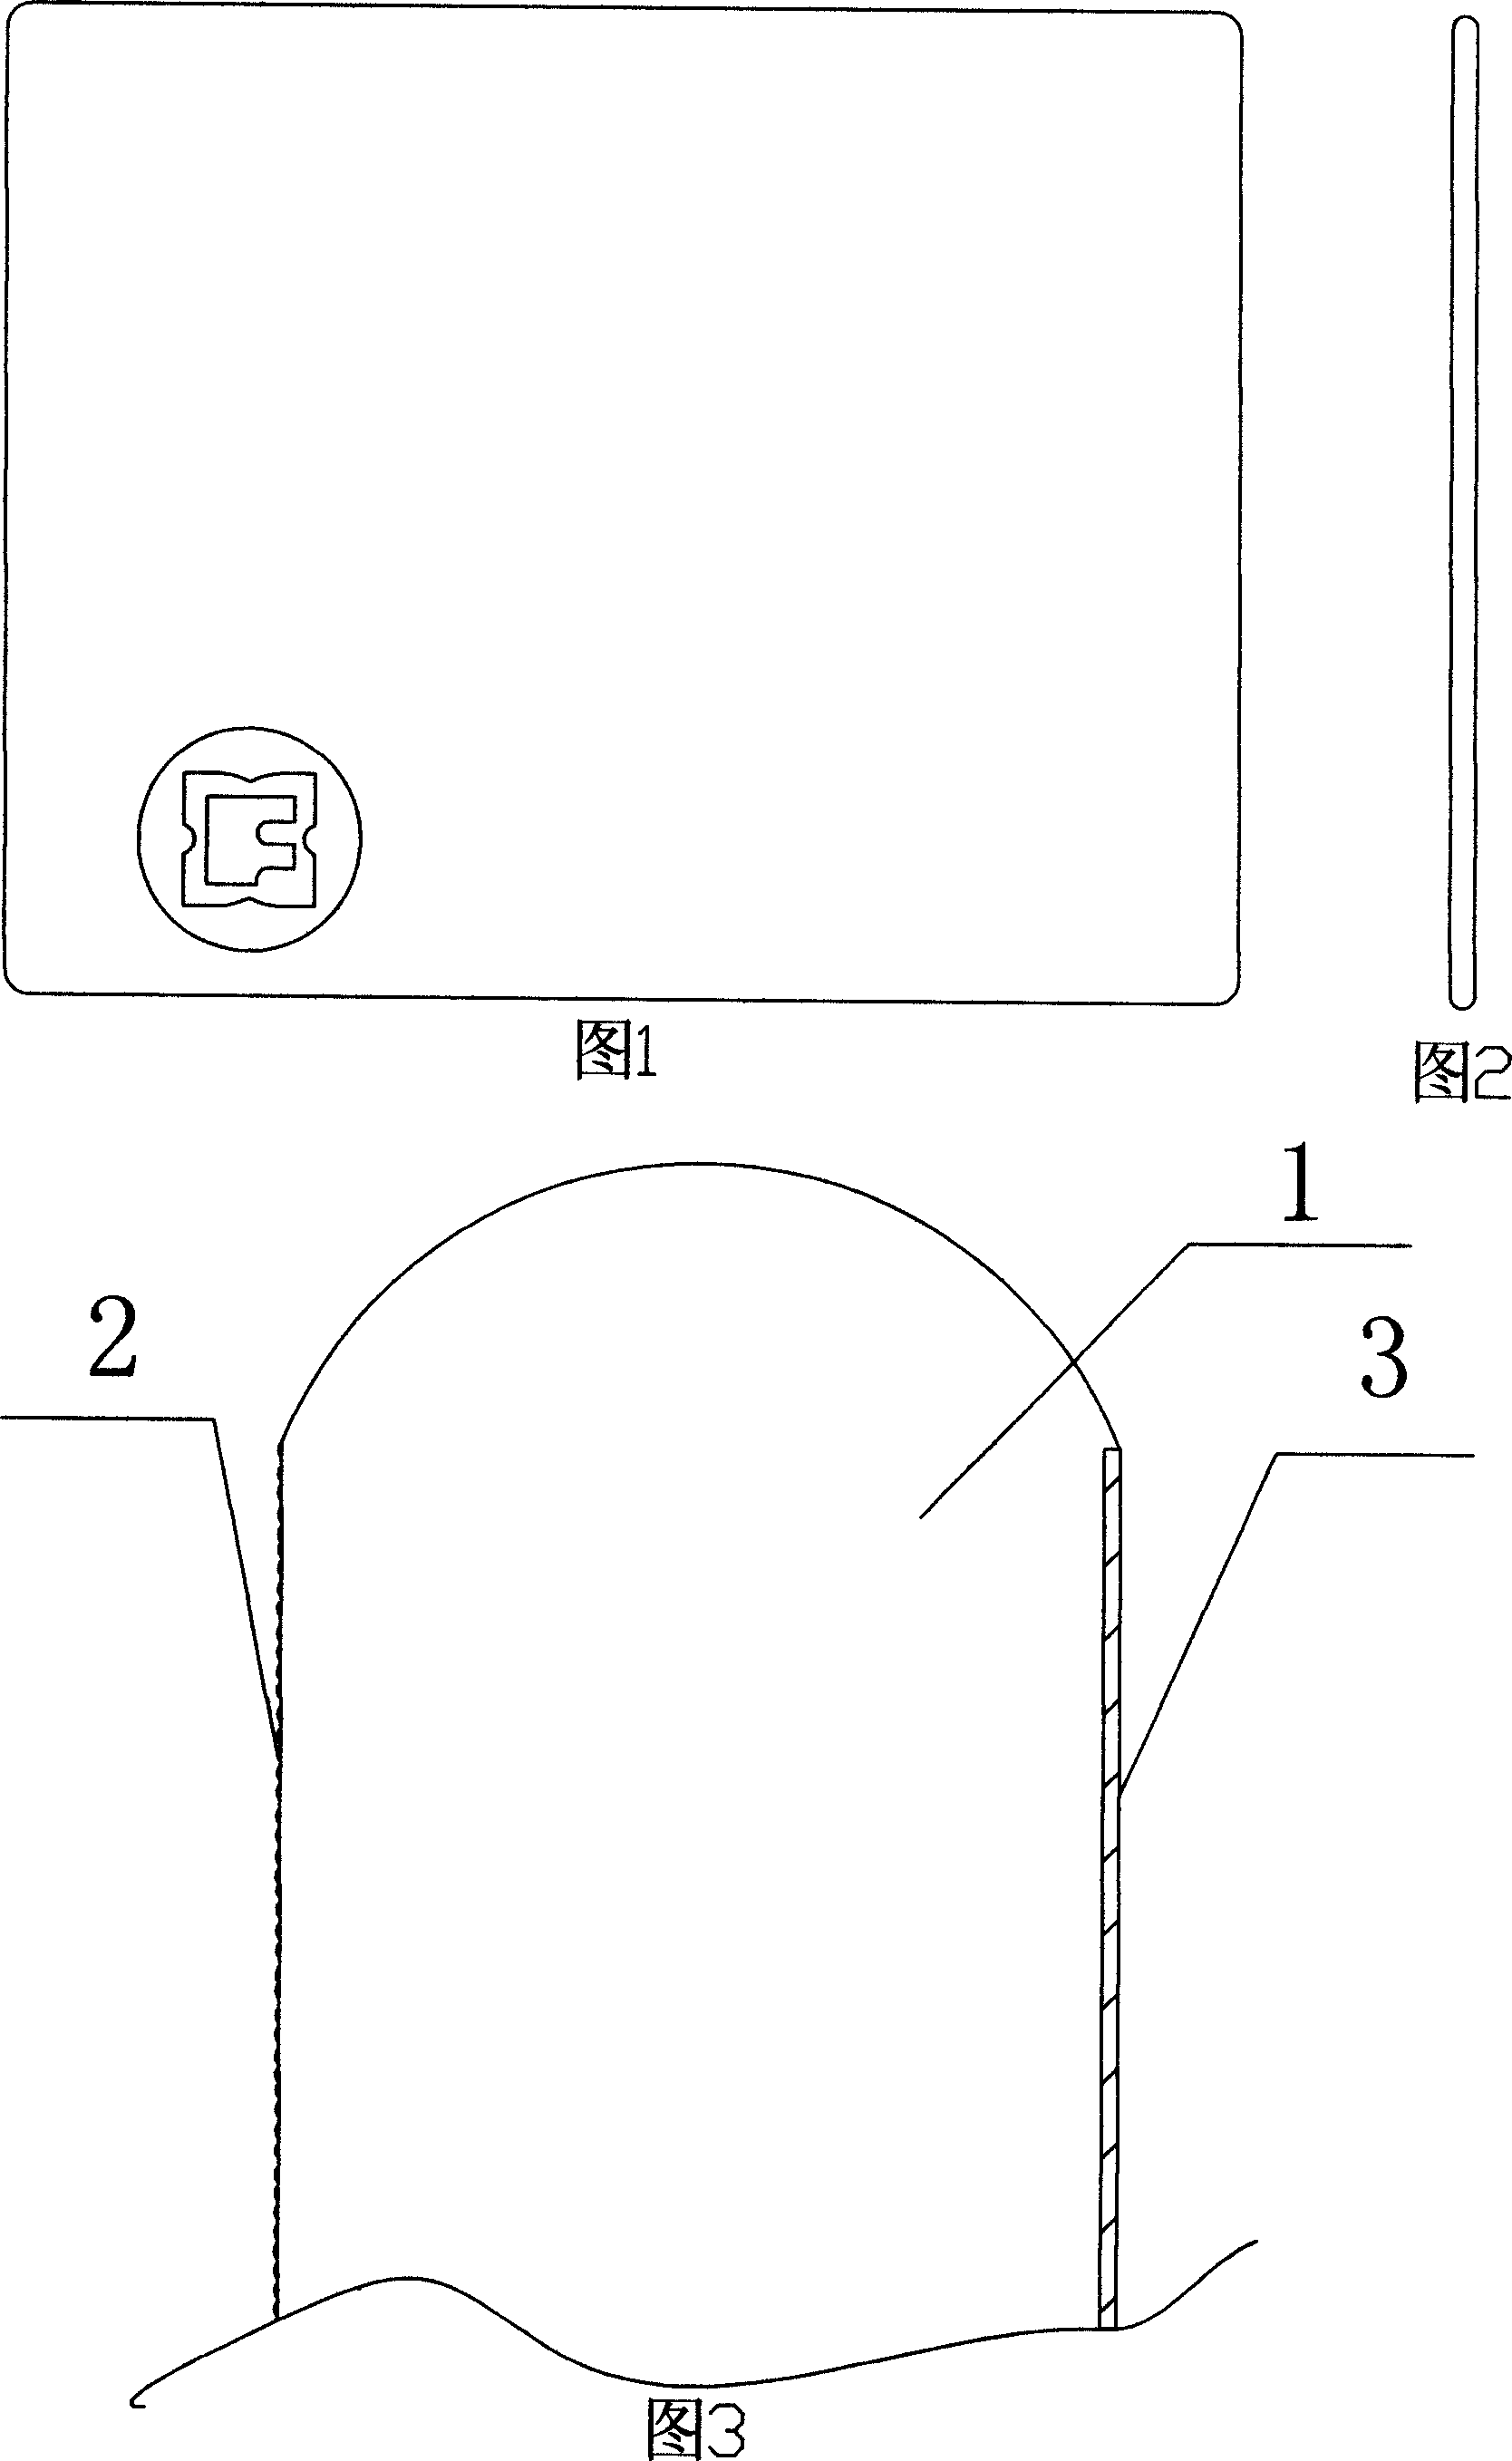 Method for producing computer mouse pad from glass